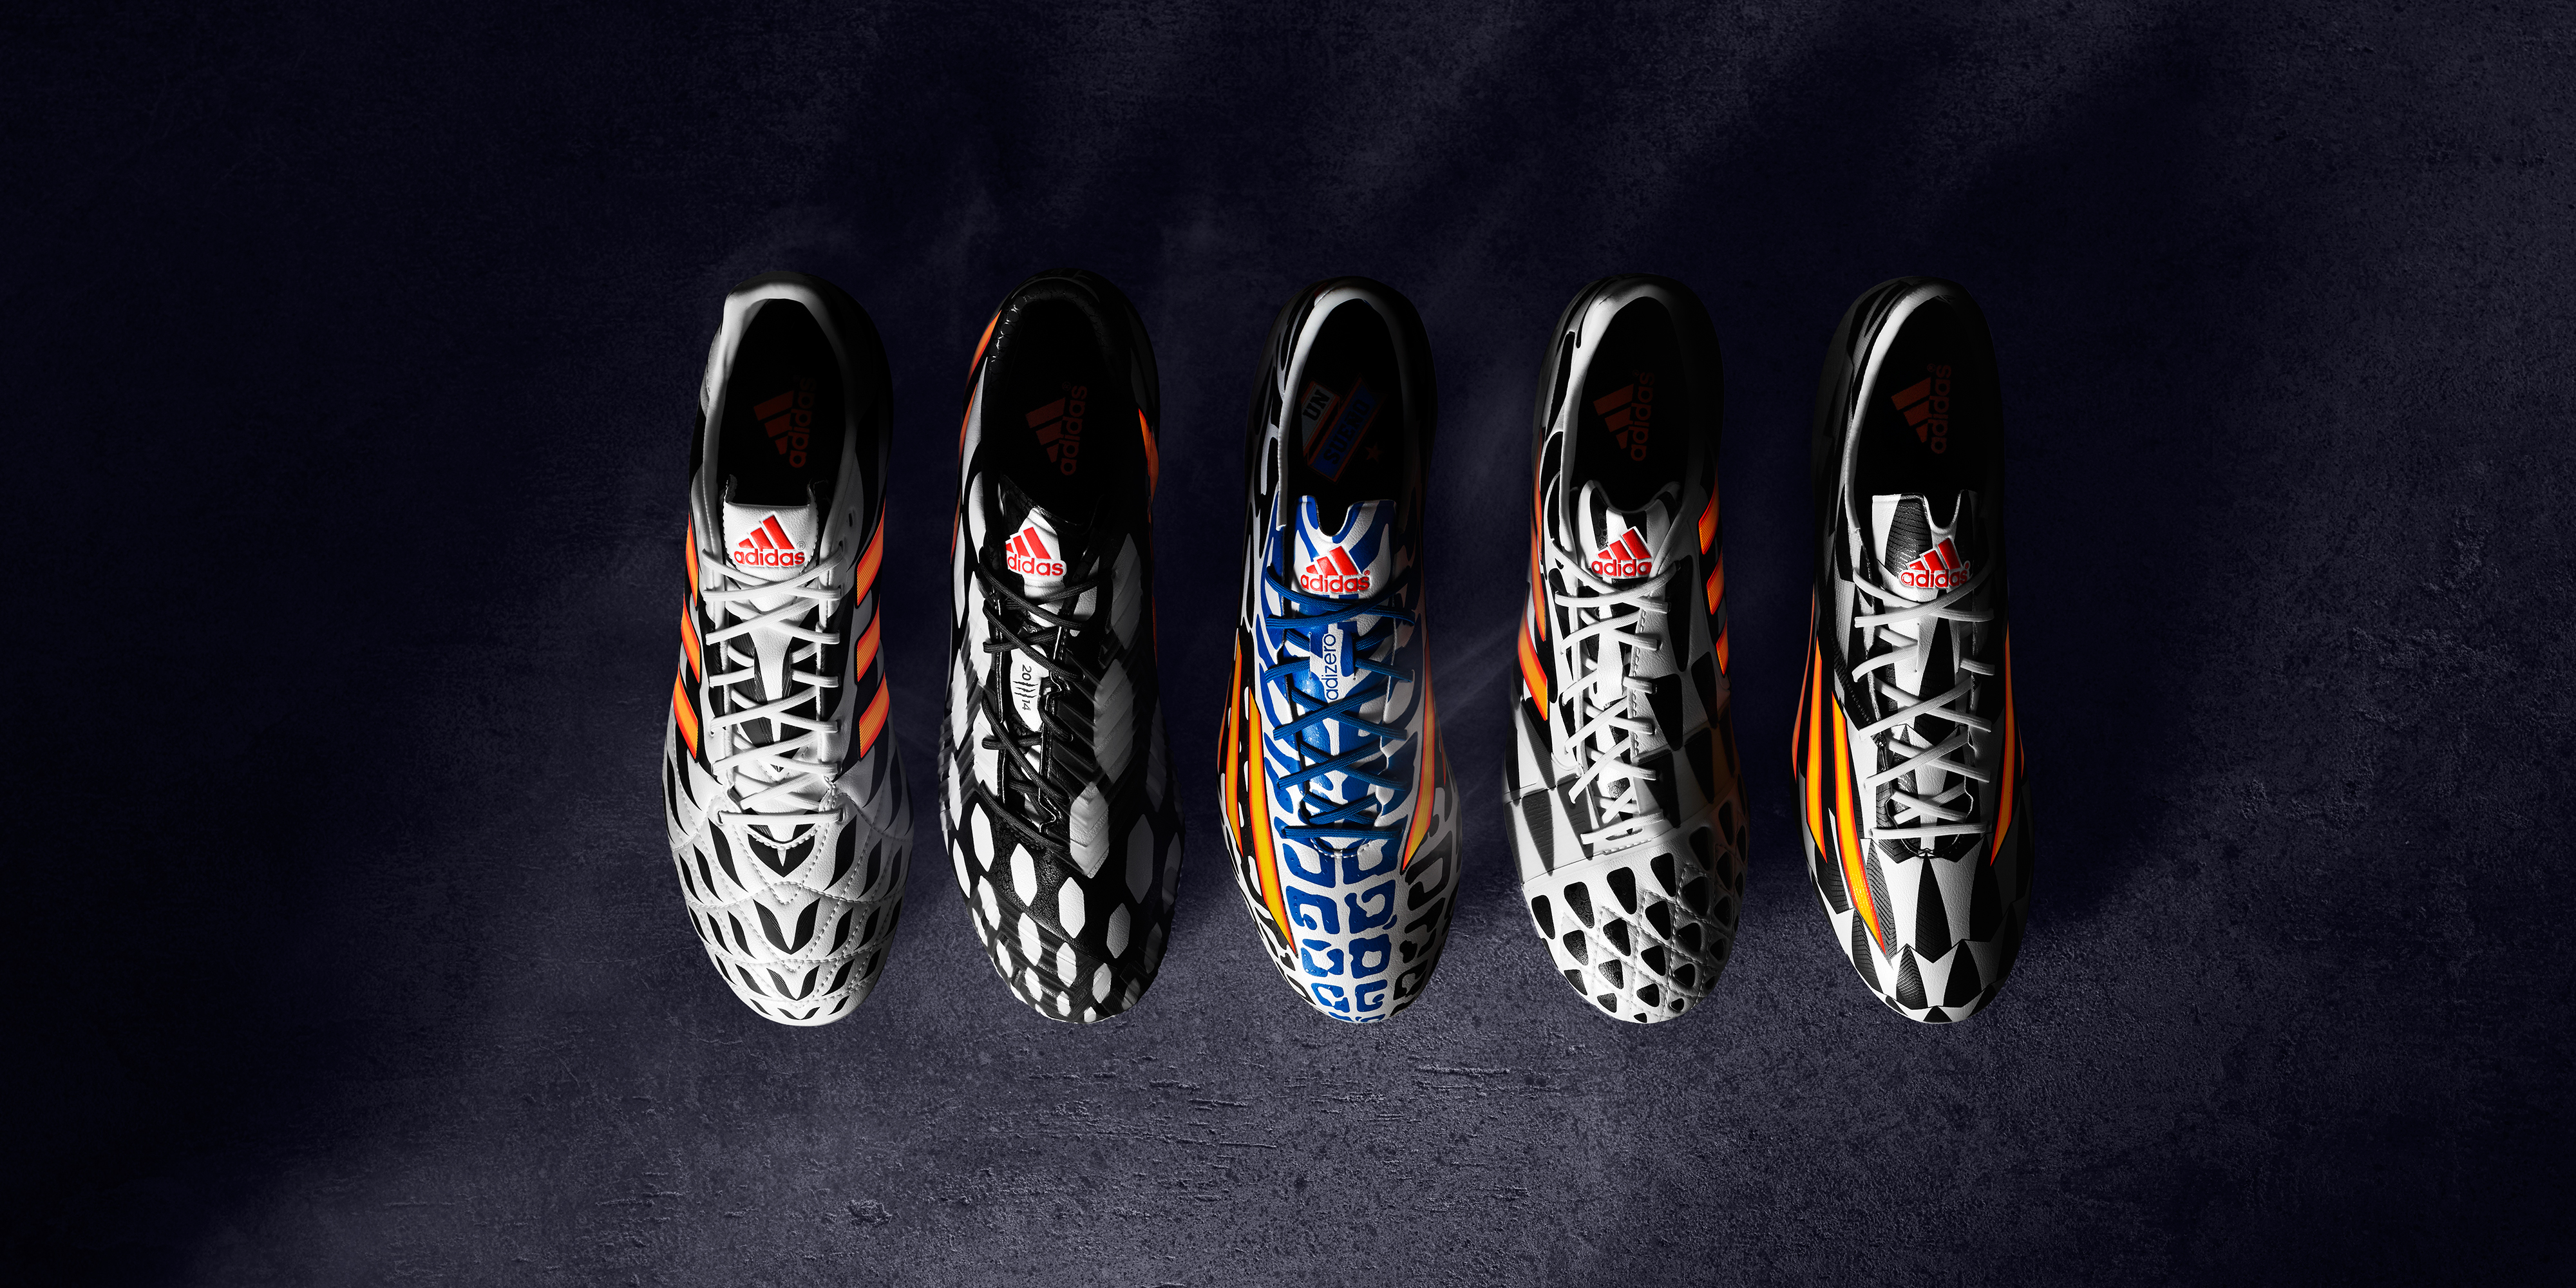 Adidas unveils unique Battle Pack boots collection ahead of 2014 World Cup  in Brazil, SIDELINE